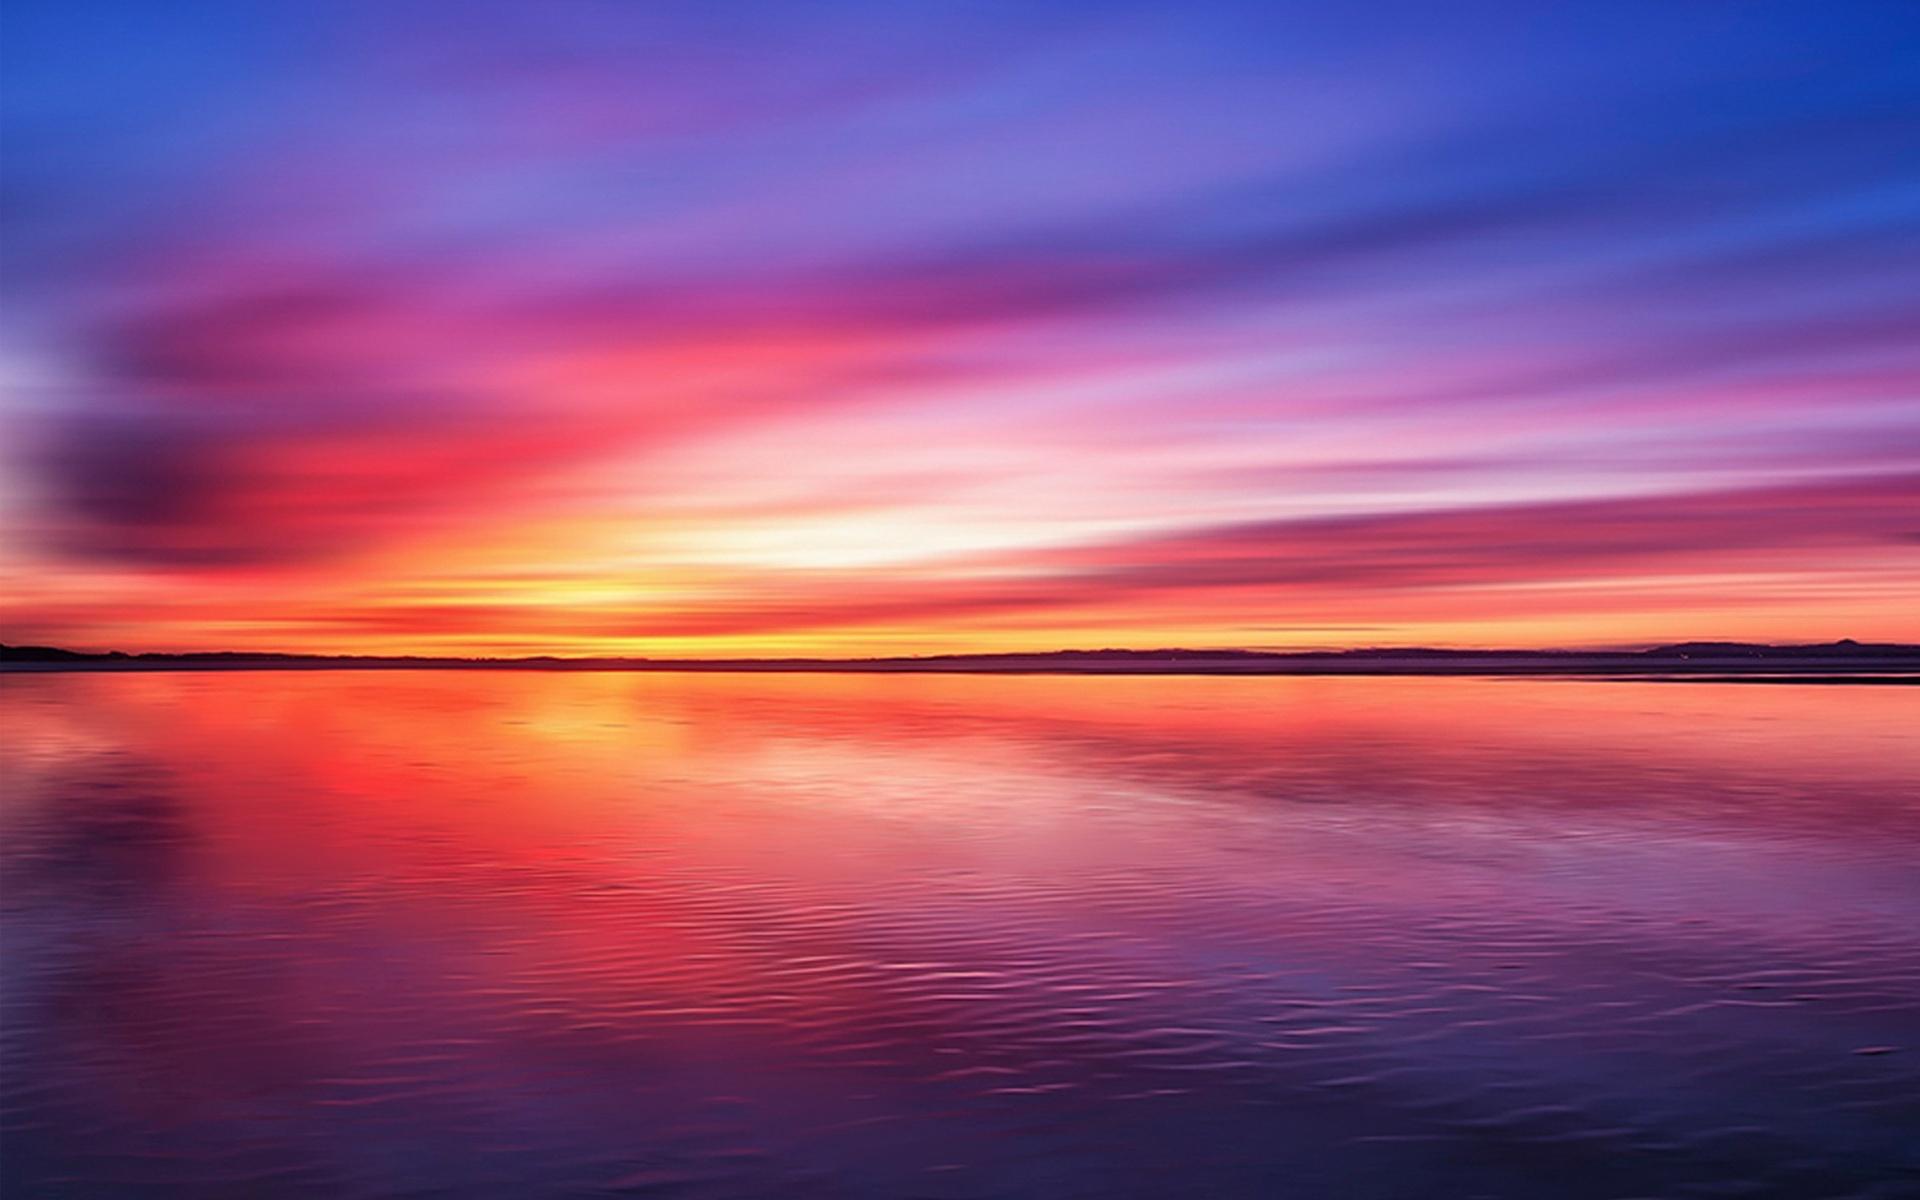 Colors of Dusk Wallpaper in jpg format for free download